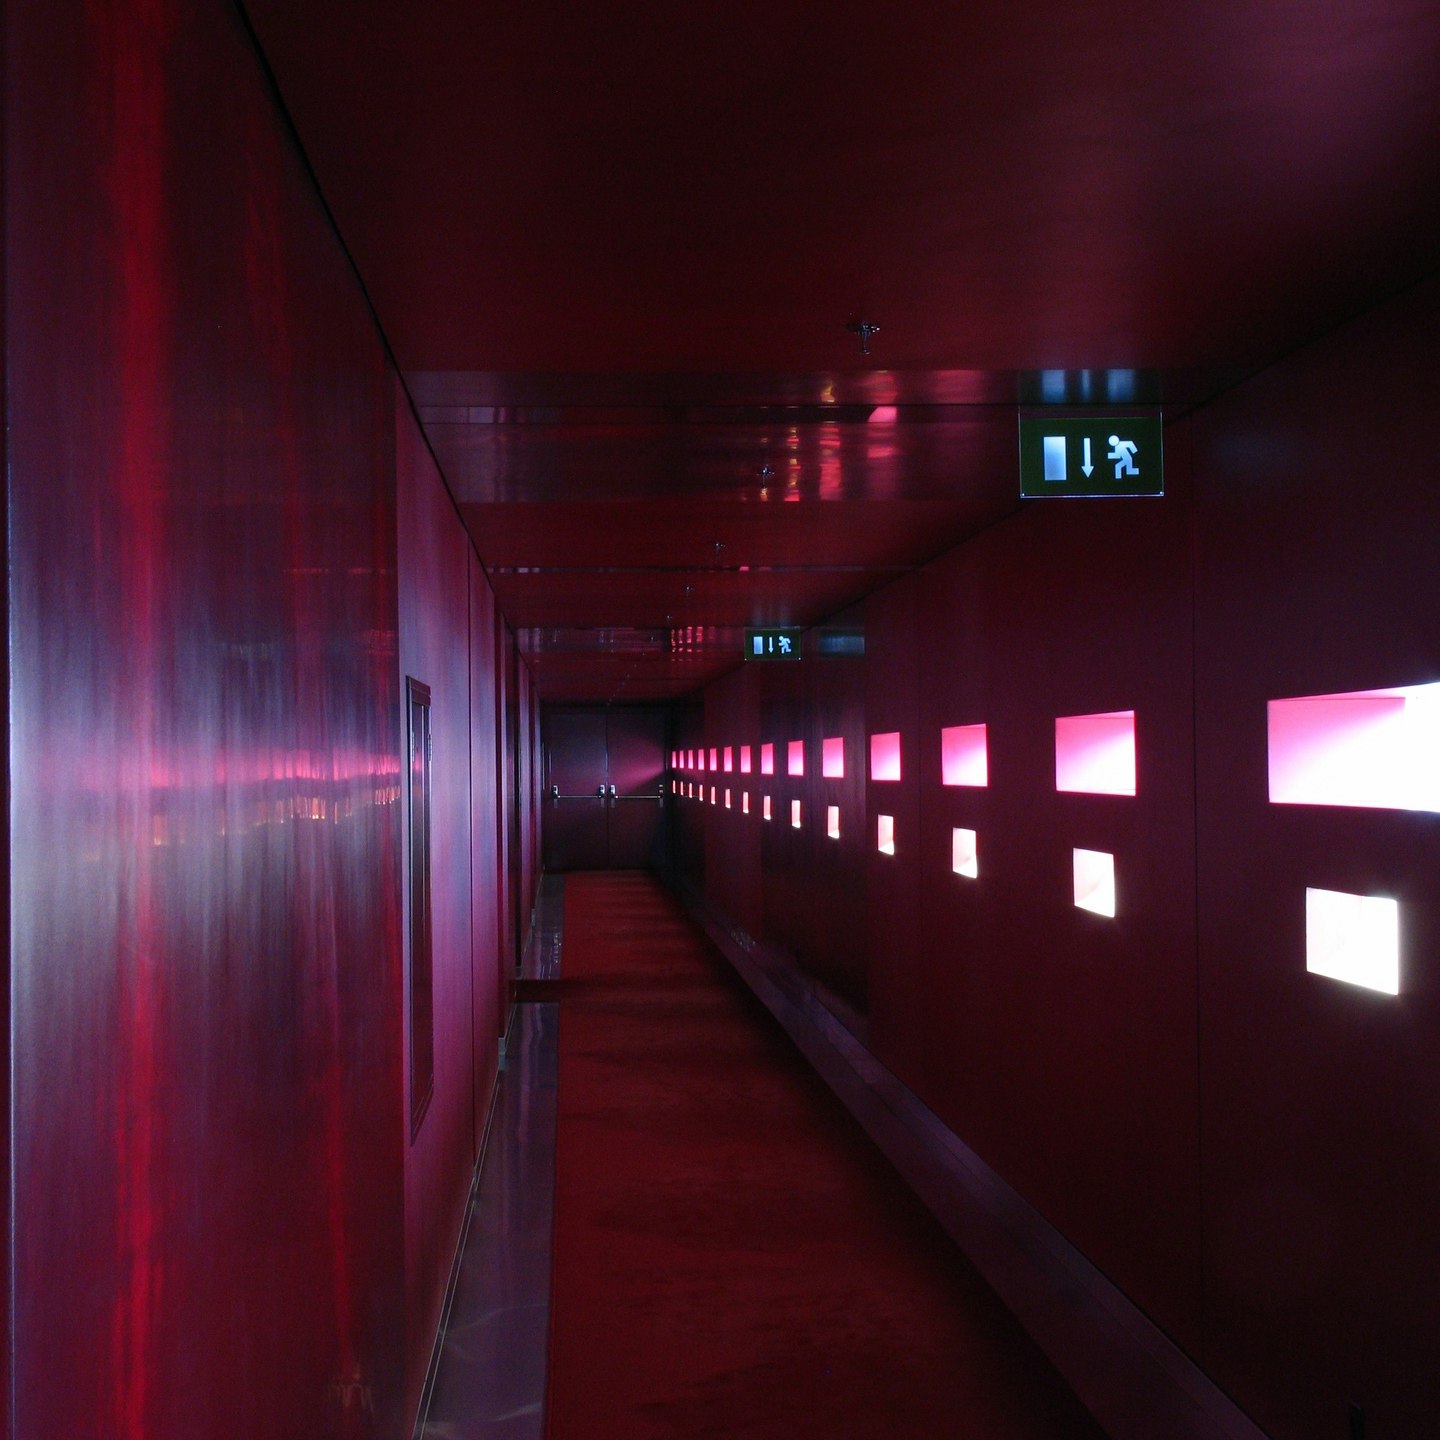 The corridors leading to the Concert Hall with the small Windows are reminiscent of a Ship.